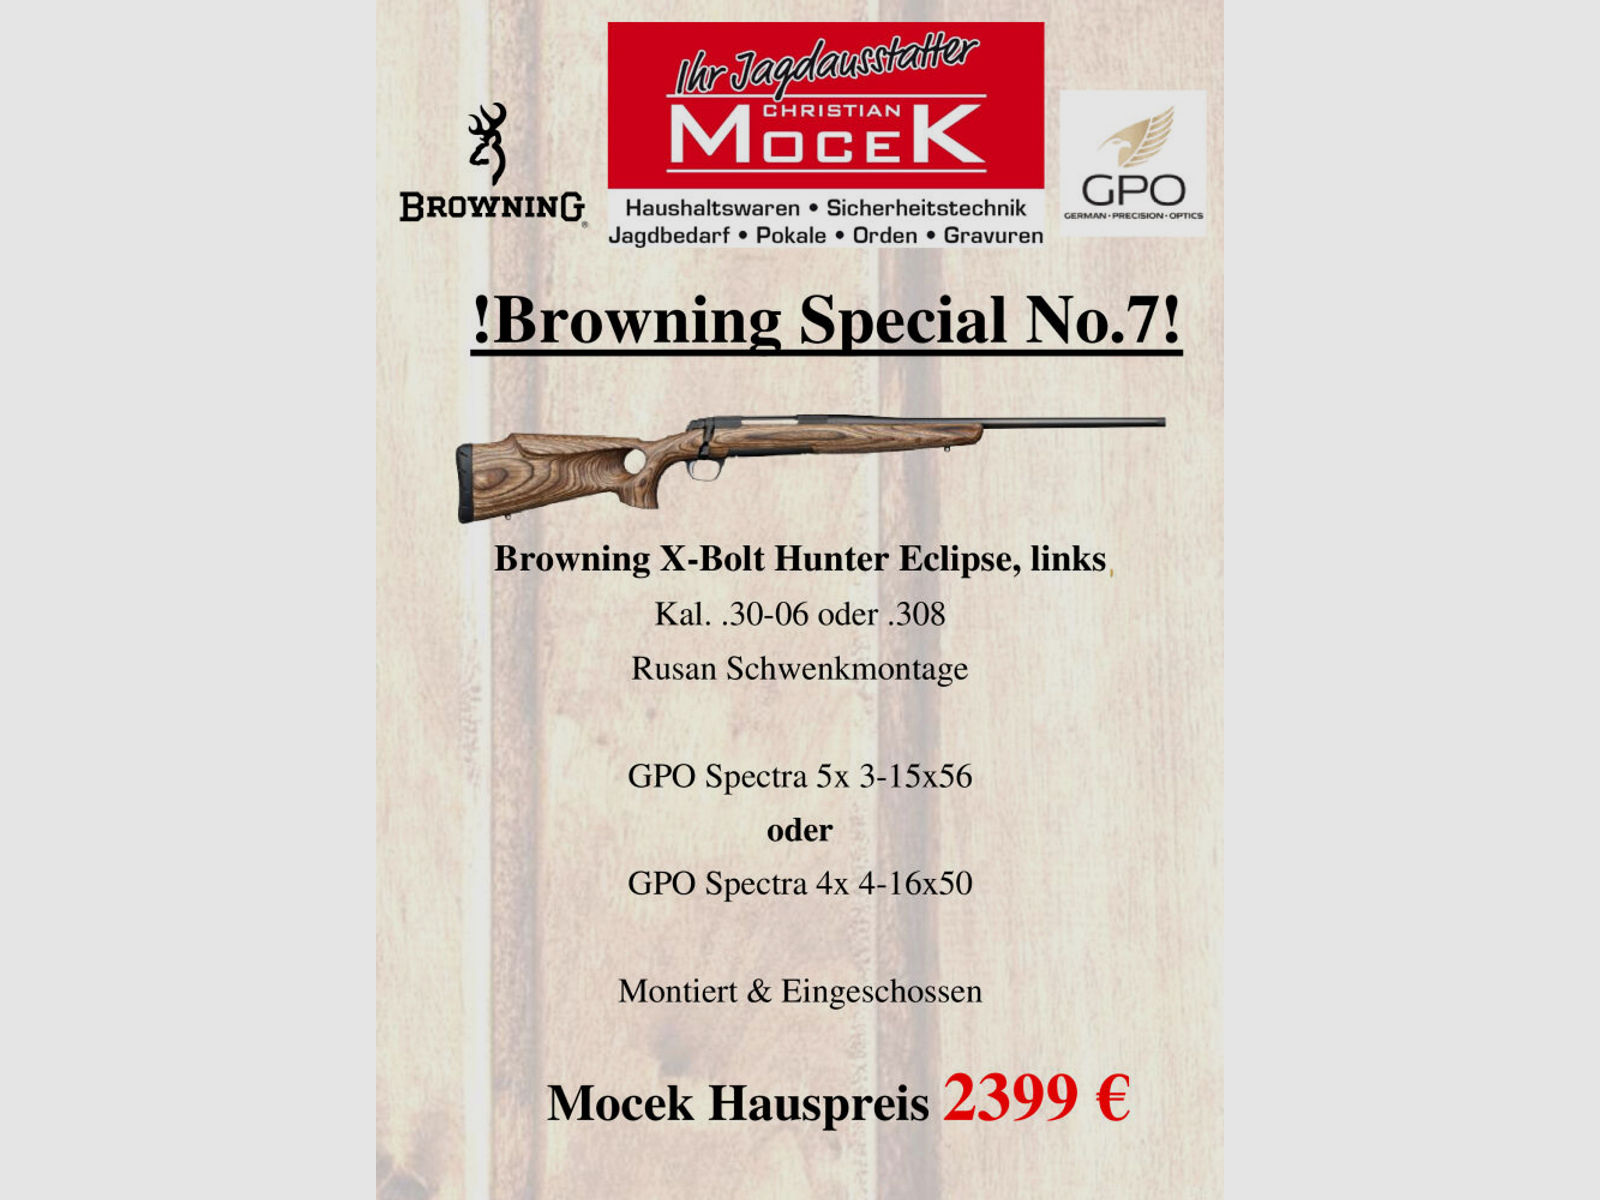 Browning	 X-Bolt Hunter Eclipse, mit GPO Spectra, links